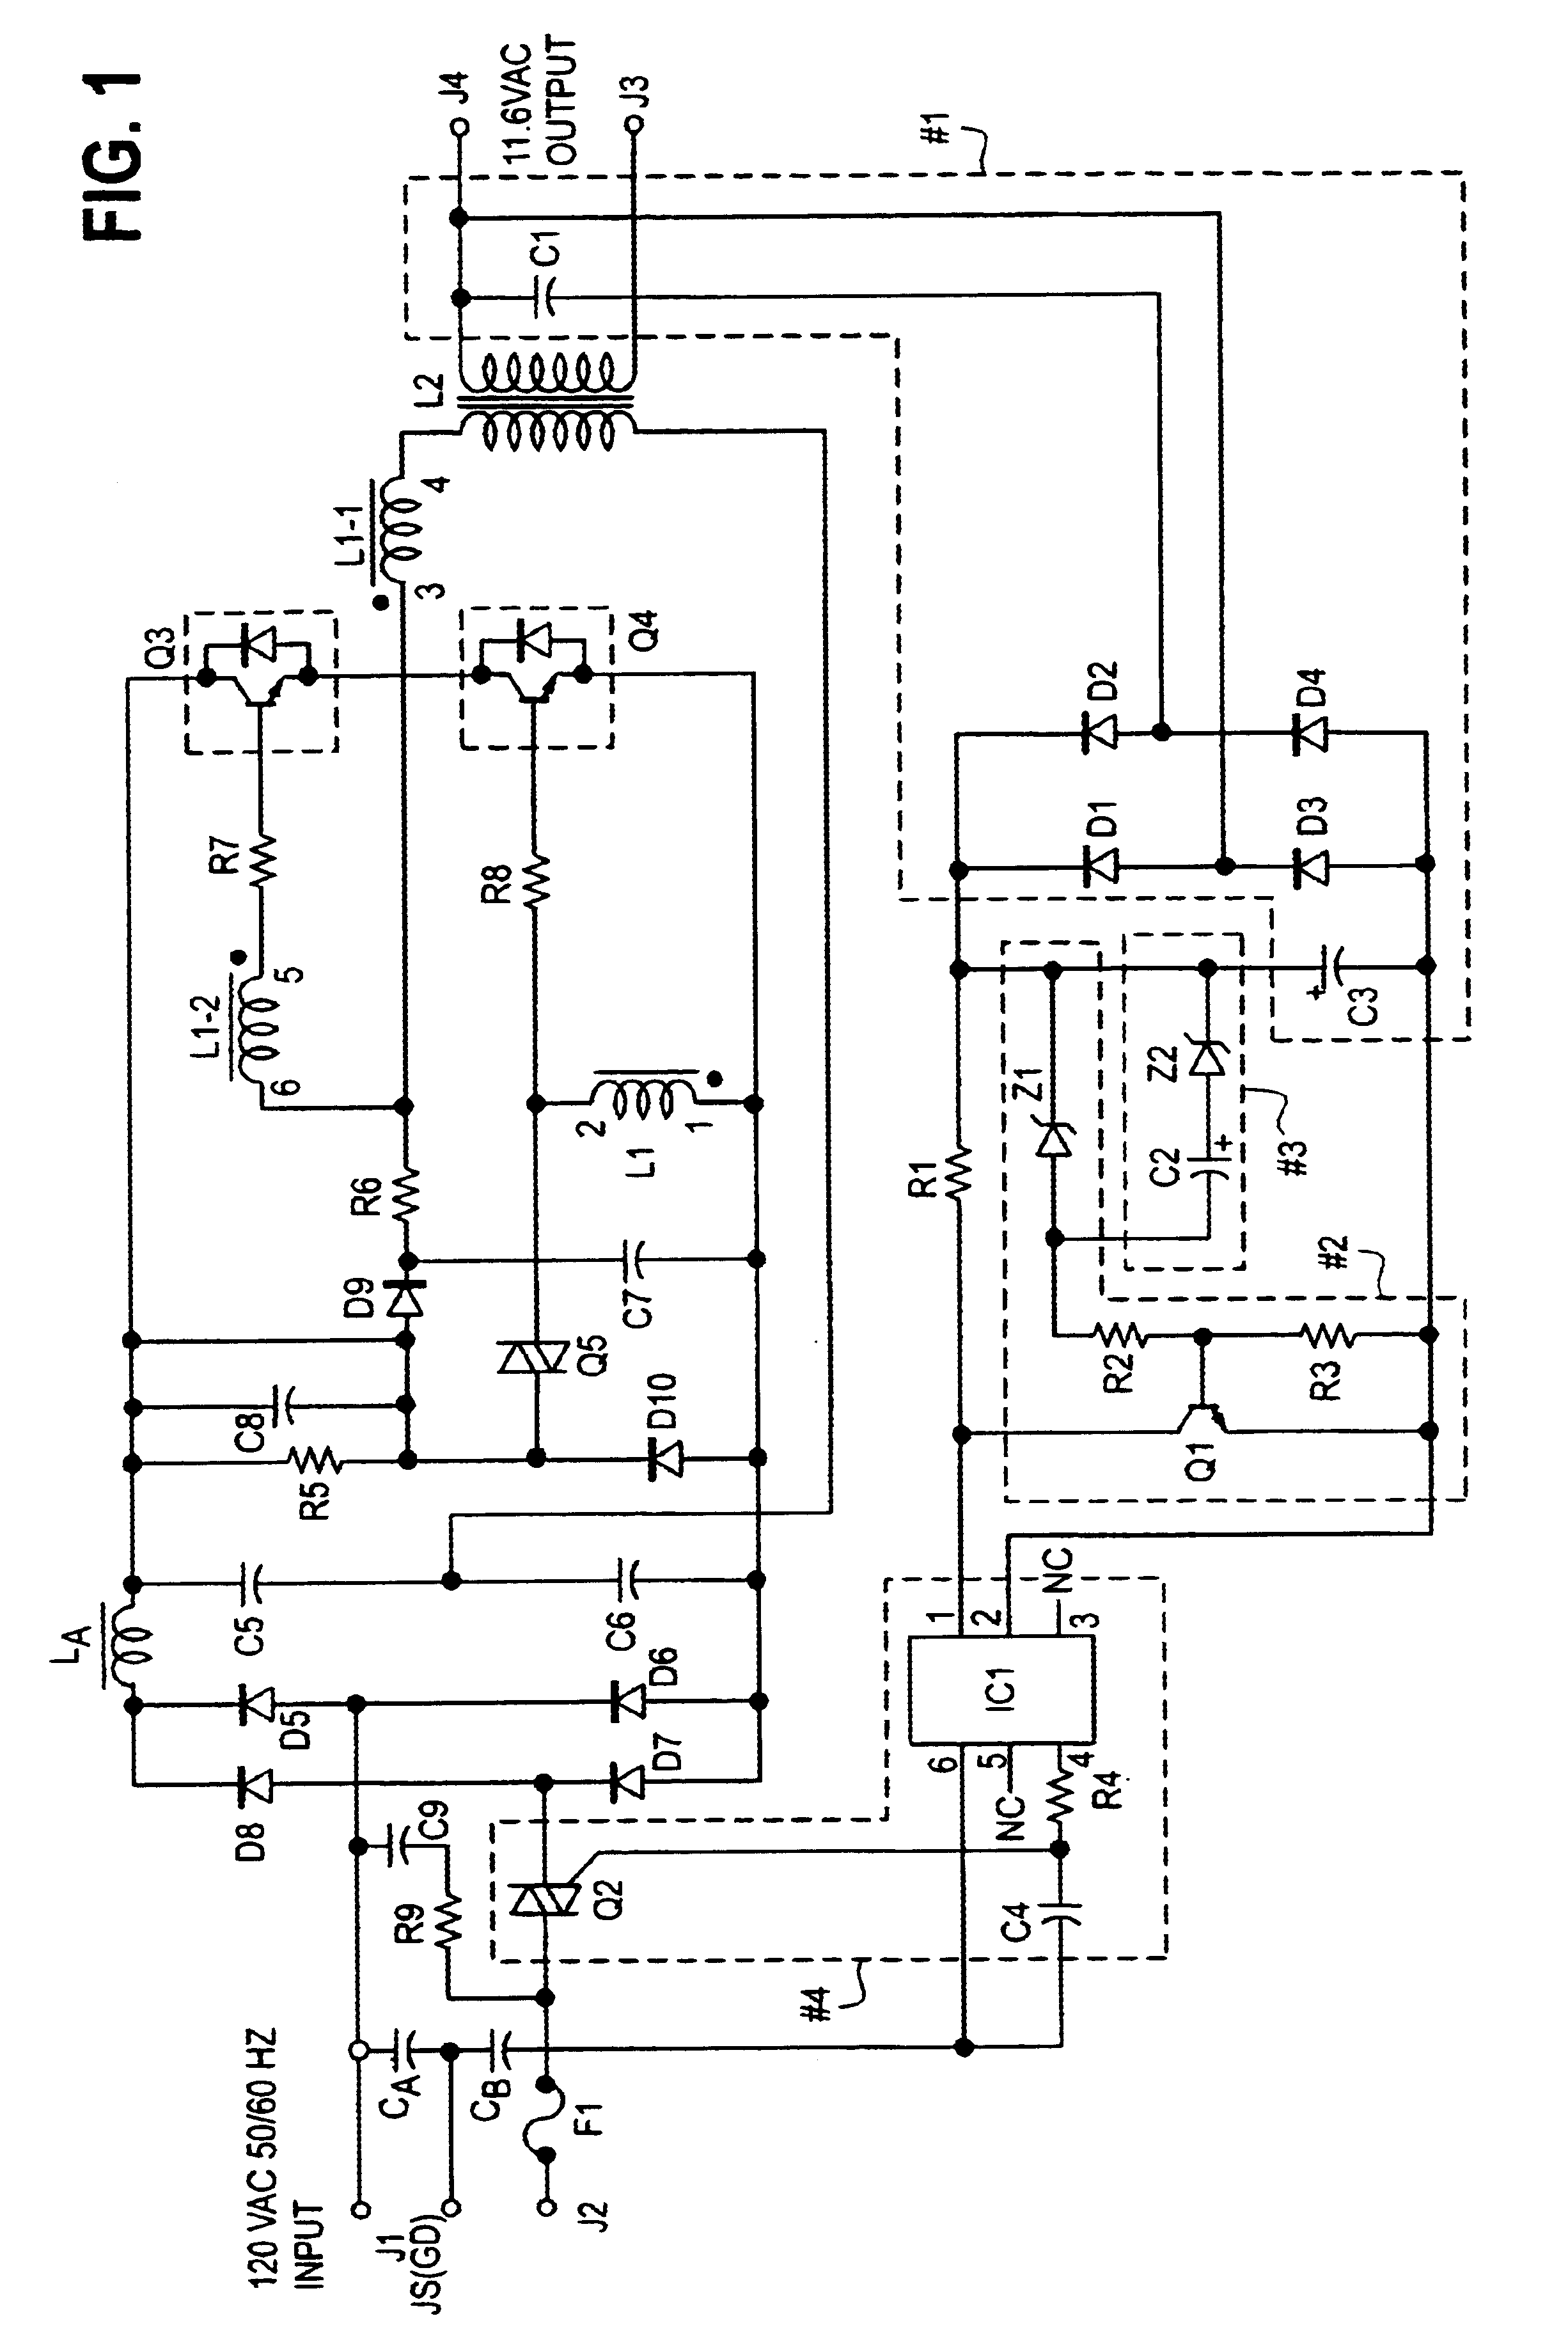 Voltage regulator for line powered linear and switching power supply